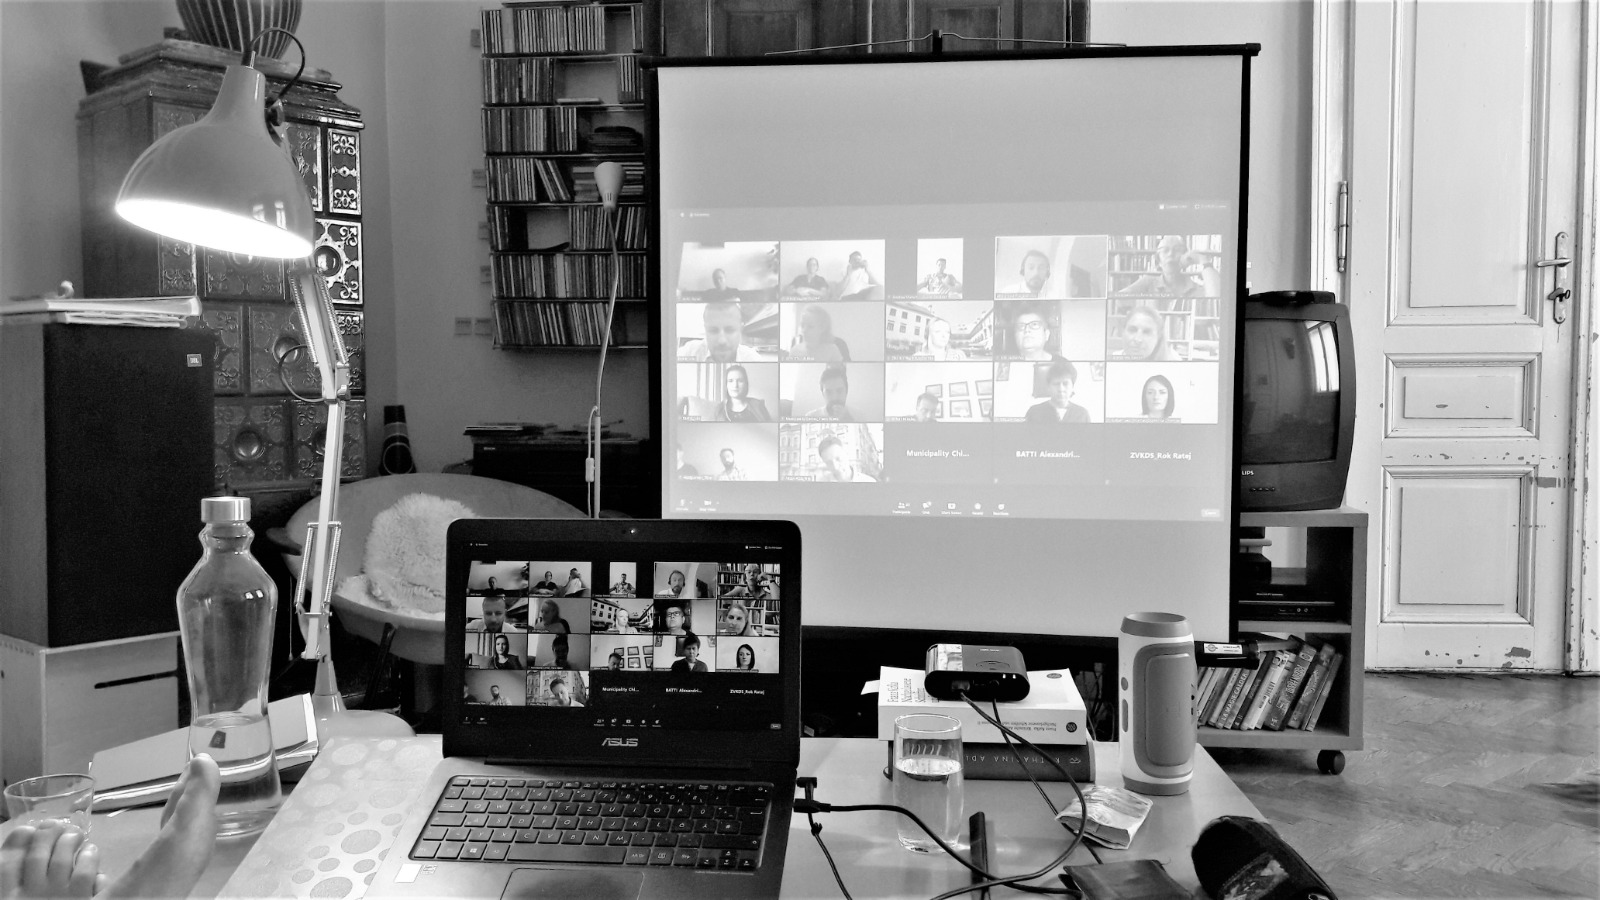 B/W image of meeting set up in a Viennese appartment.